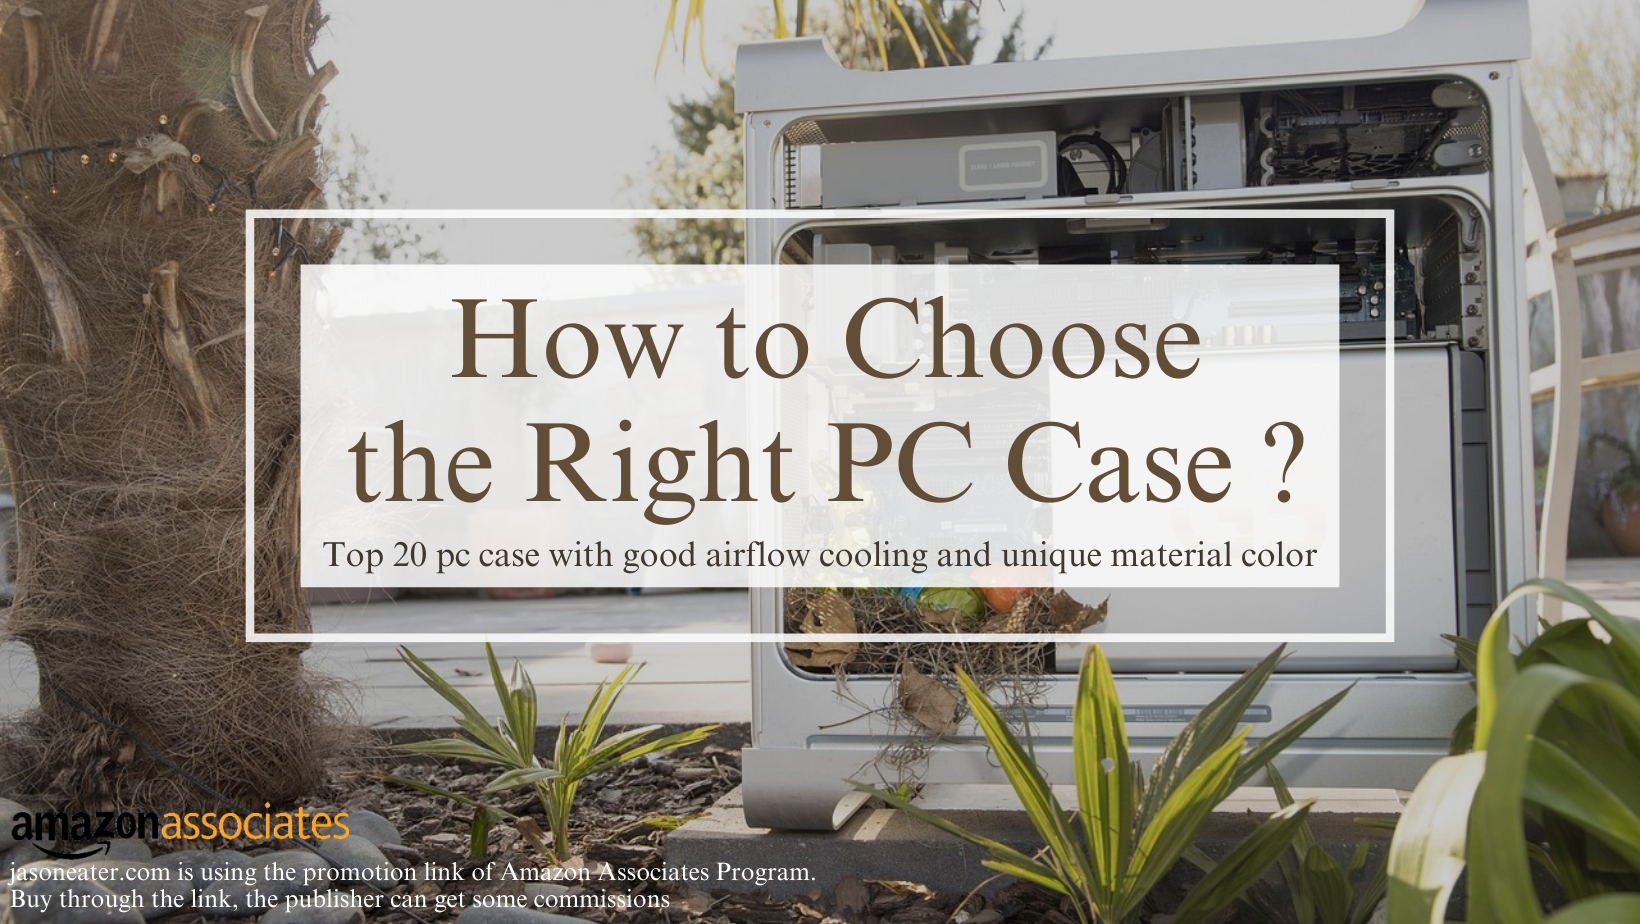 How to Choose the PC Case ? Top 20 PC Case with good airflow cooling and unique material color